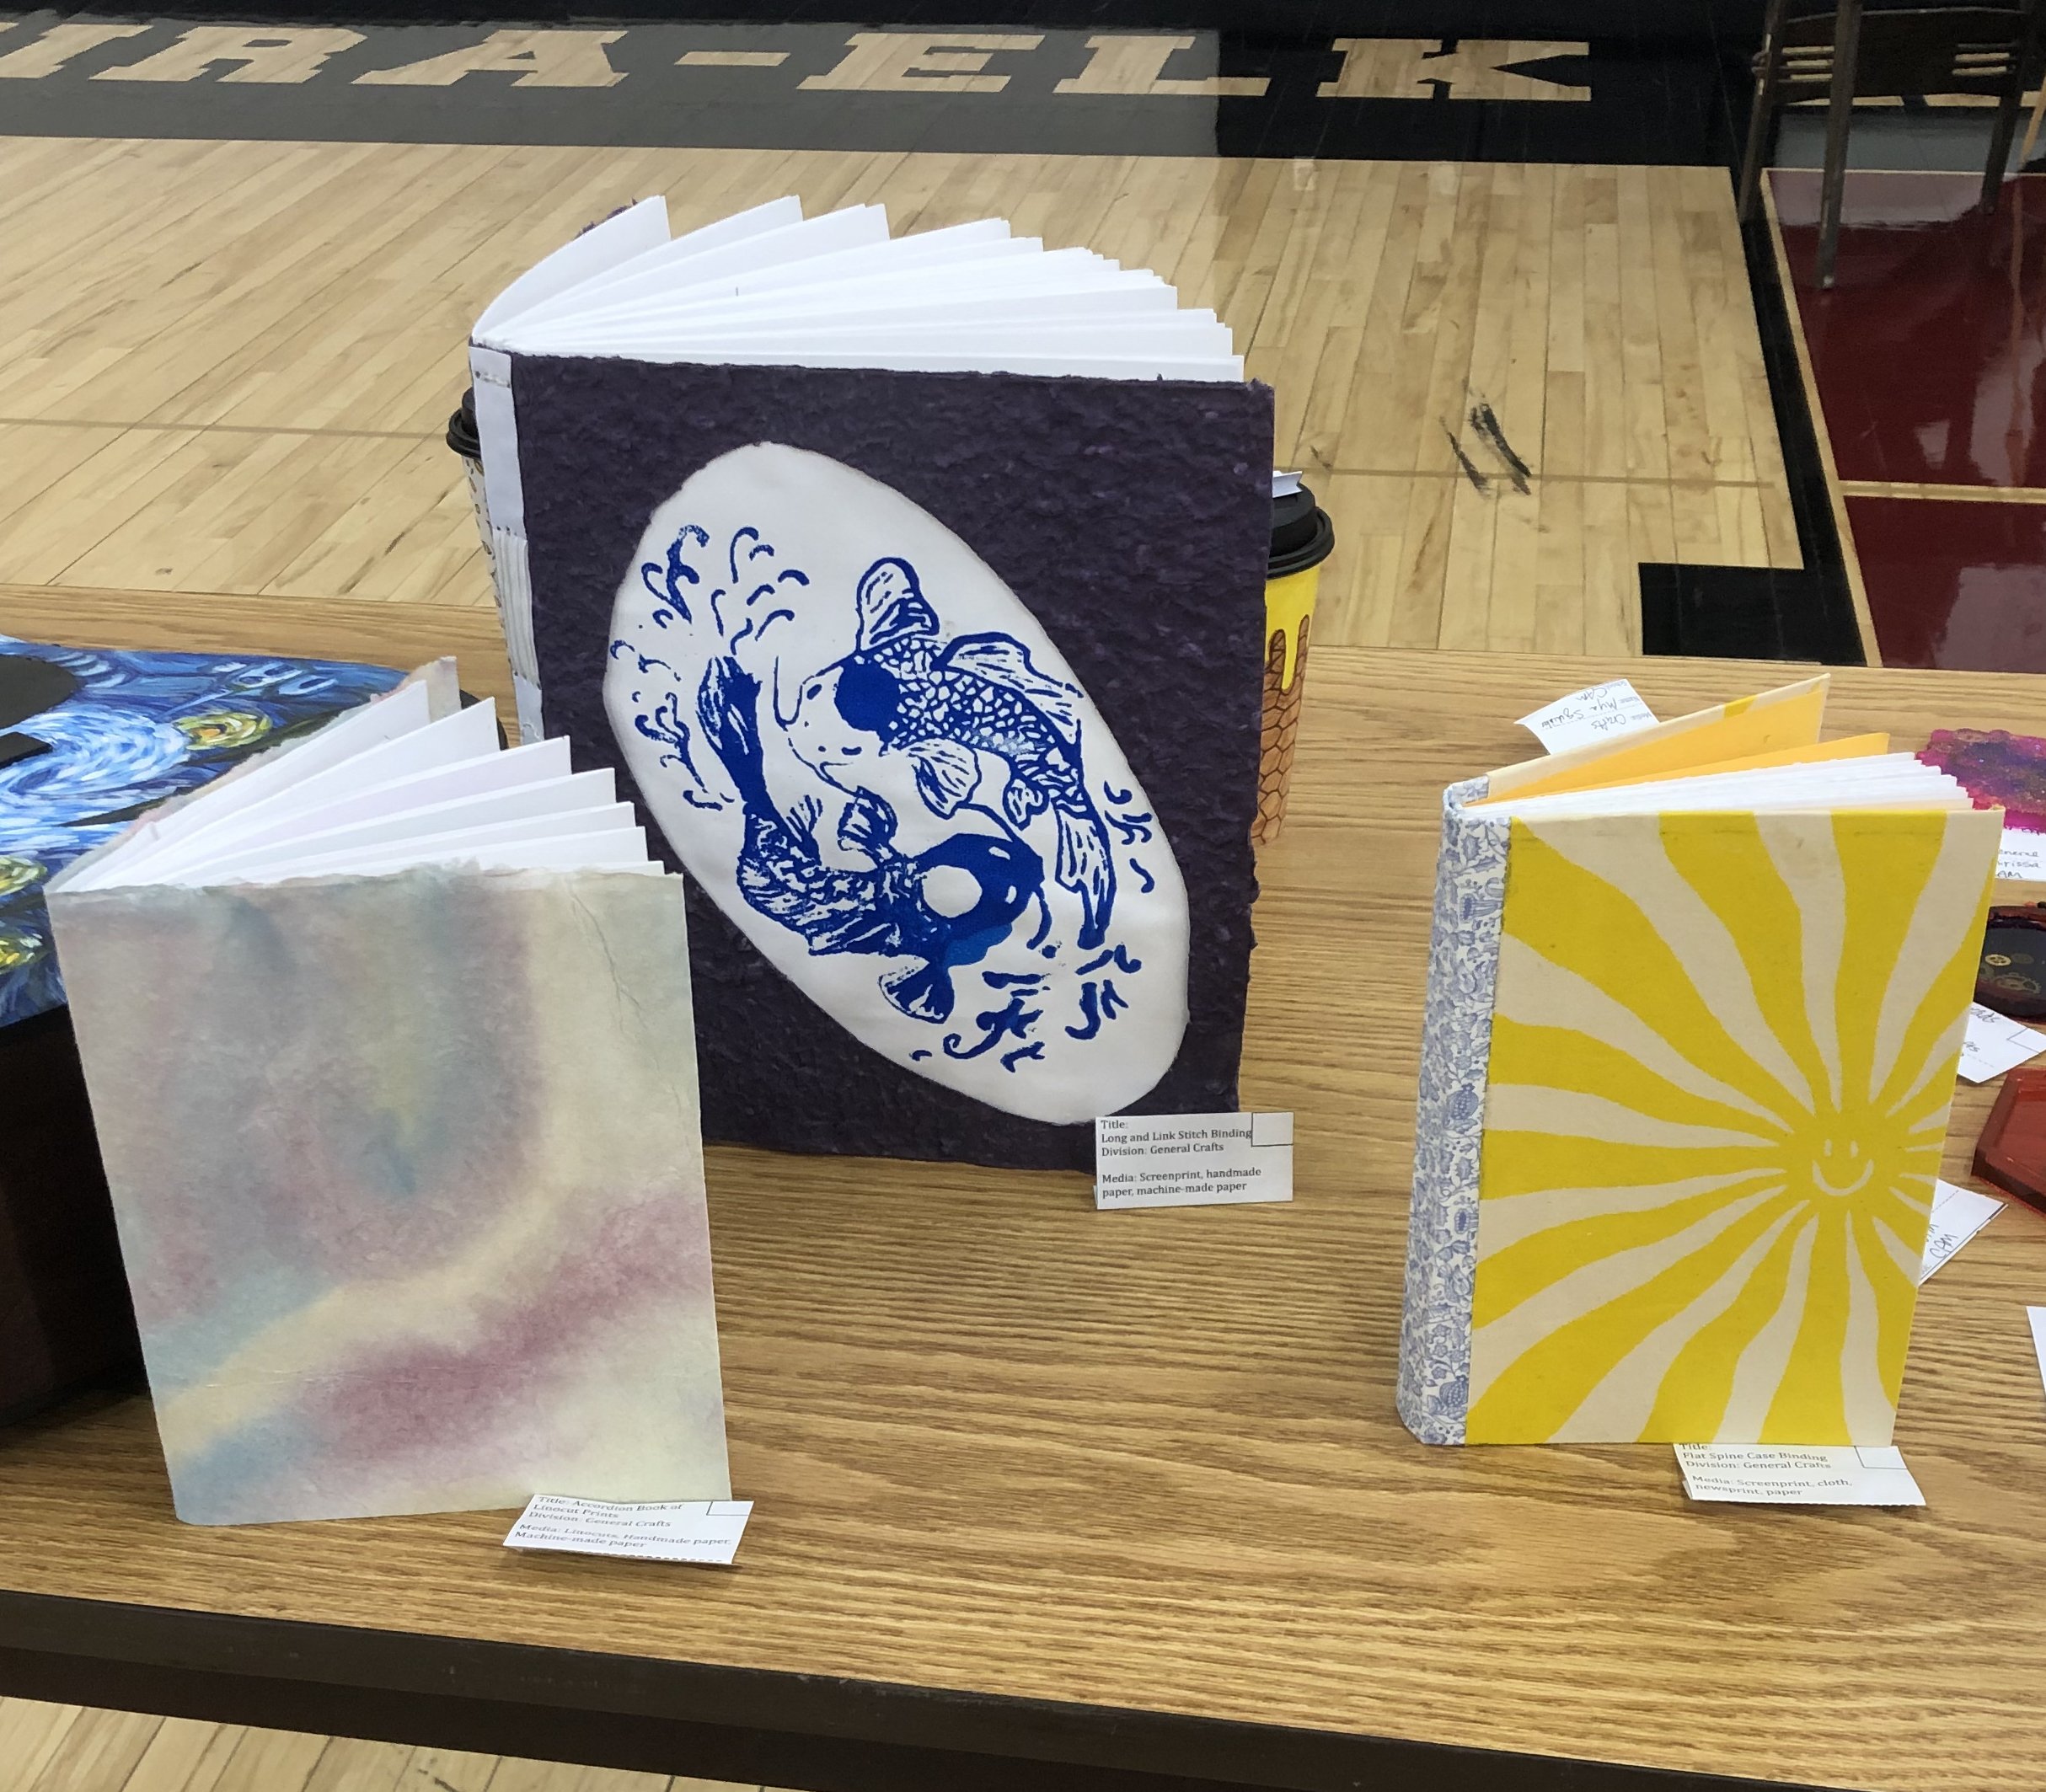 Student bookbinding examples with handmade papers and prints